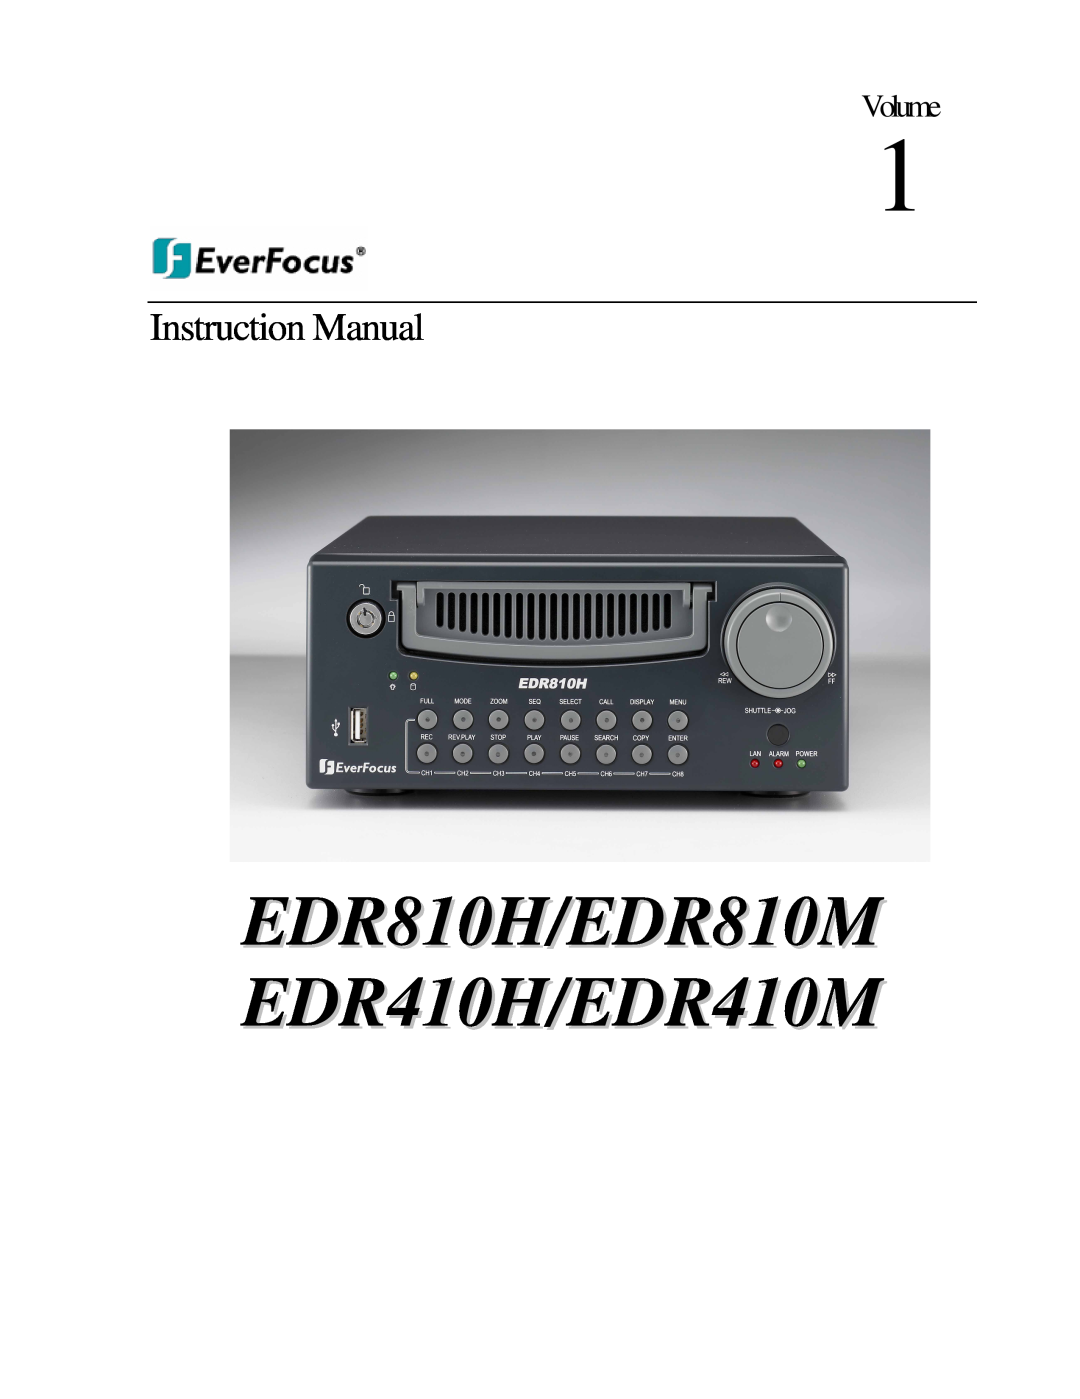 EverFocus EDR810M, EDR410MW specifications Digital Video Recorders Mobile Unit DVRs, Features, Specifications 